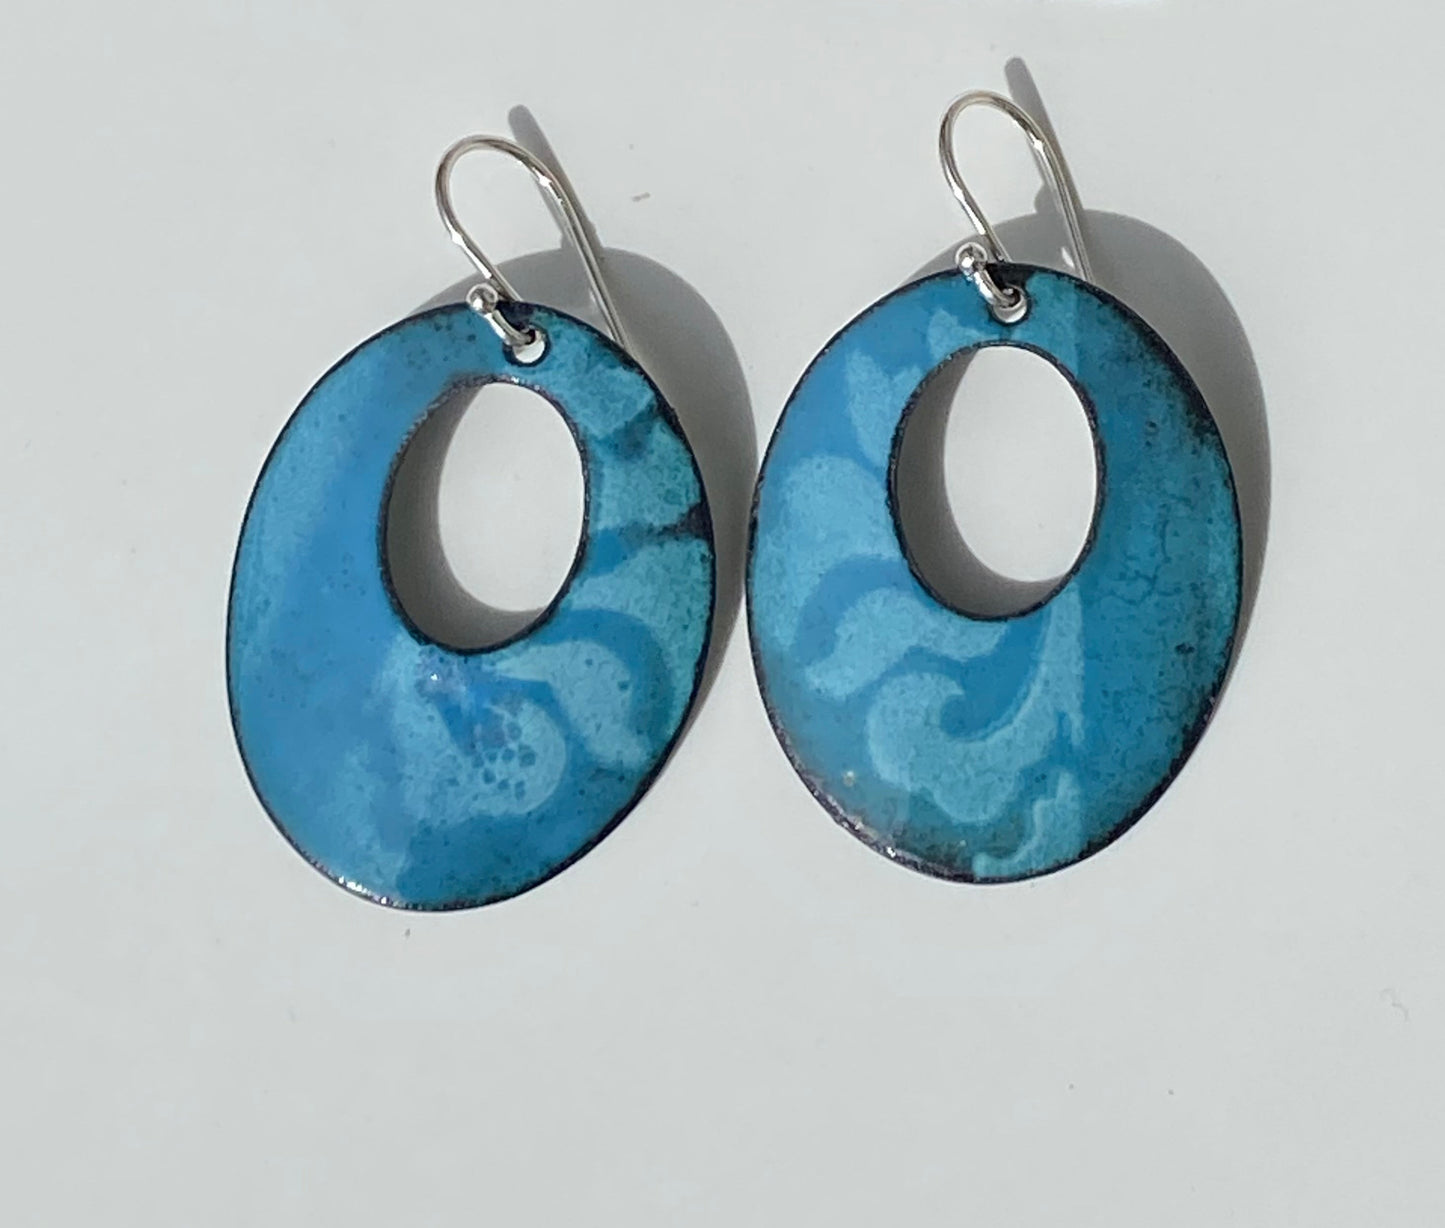 Oval Hoop Filigree Enamel Earrings Jewelry Artist: Kristie Brown Bluish Green color with filigree pattern enamel earrings  Oval Hoop shaped Earrings  1 1/2" long x  1" wide  Sterling Silver ear wires  Please note, each piece is custom designed by the Artist , with a slight variation between each piece